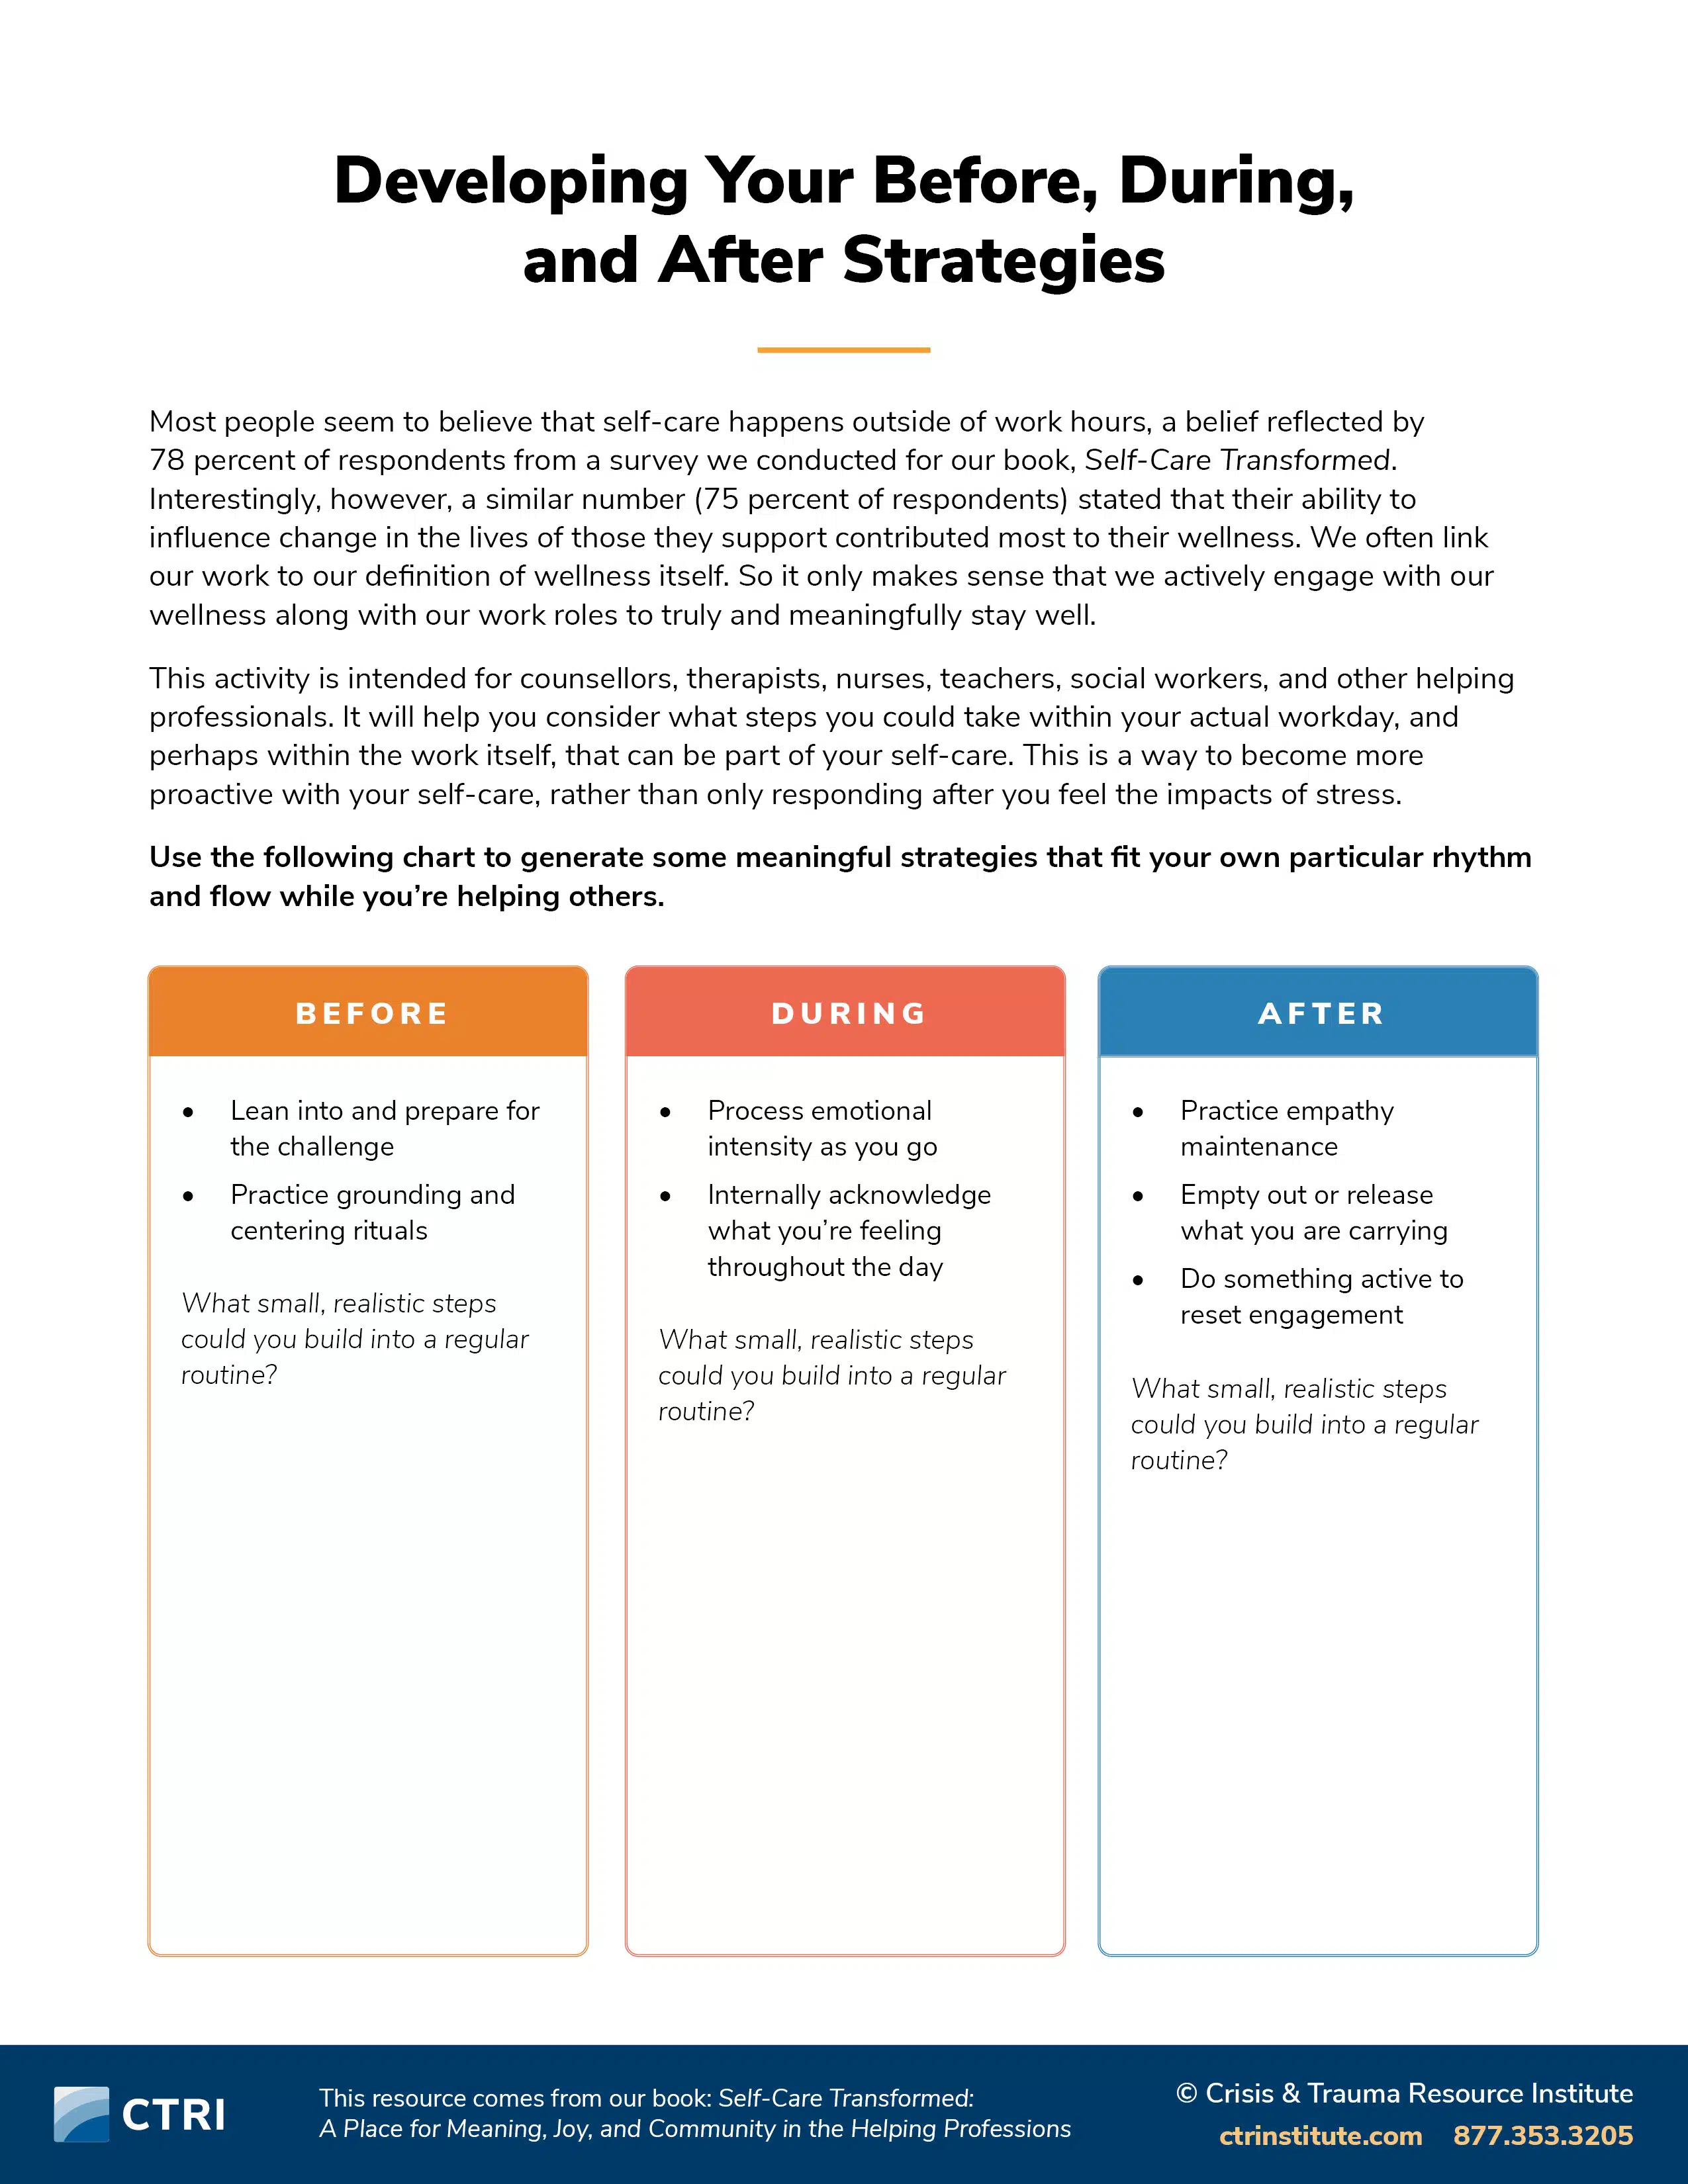 Developing Your Before, During, and After Strategies Icon